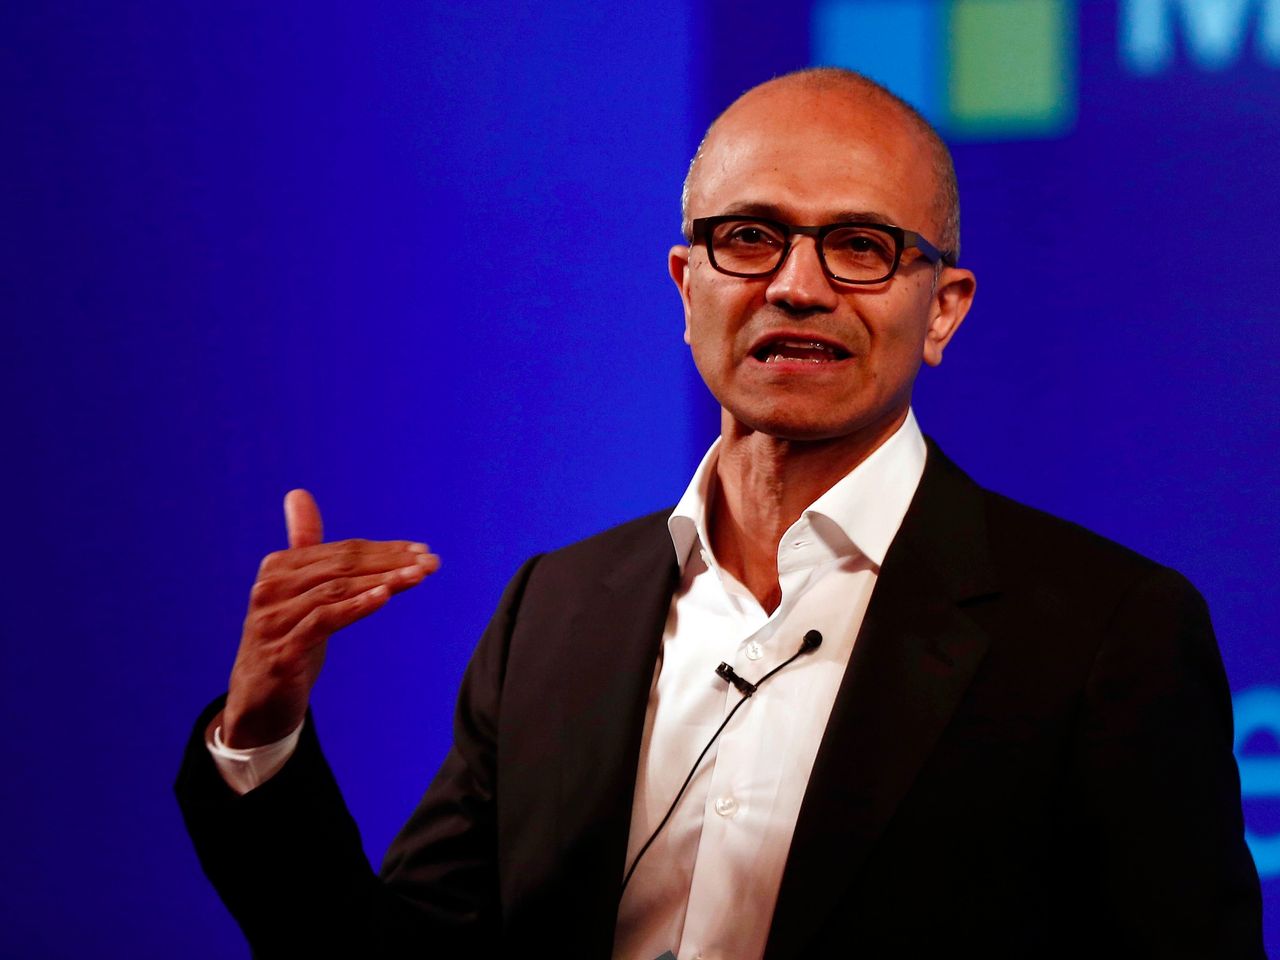 about-700-microsoft-employees-will-be-laid-off-next-week-sources-say